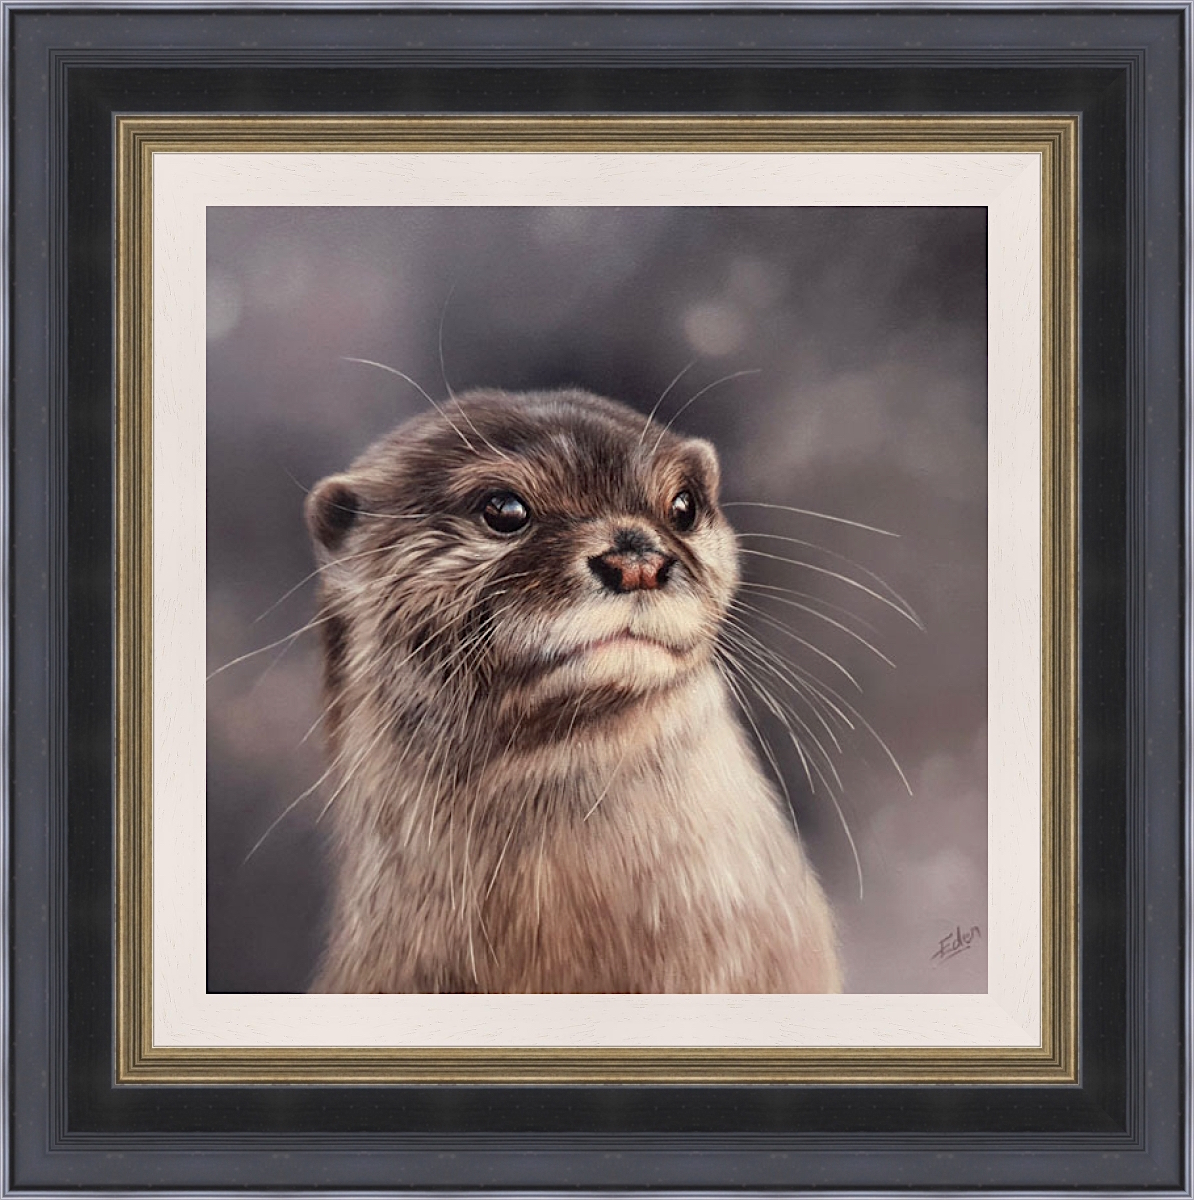 My otter painting 'Lookout', has now been turned into a beautiful varnished canvas print and is available in a choice of two frames.  DM for details.
#otter #otterlife #otters #wildotter #otterpainting #ukwildlife #britishwildlife #wildlifeart #oilpainting #ottersofinstagram #art